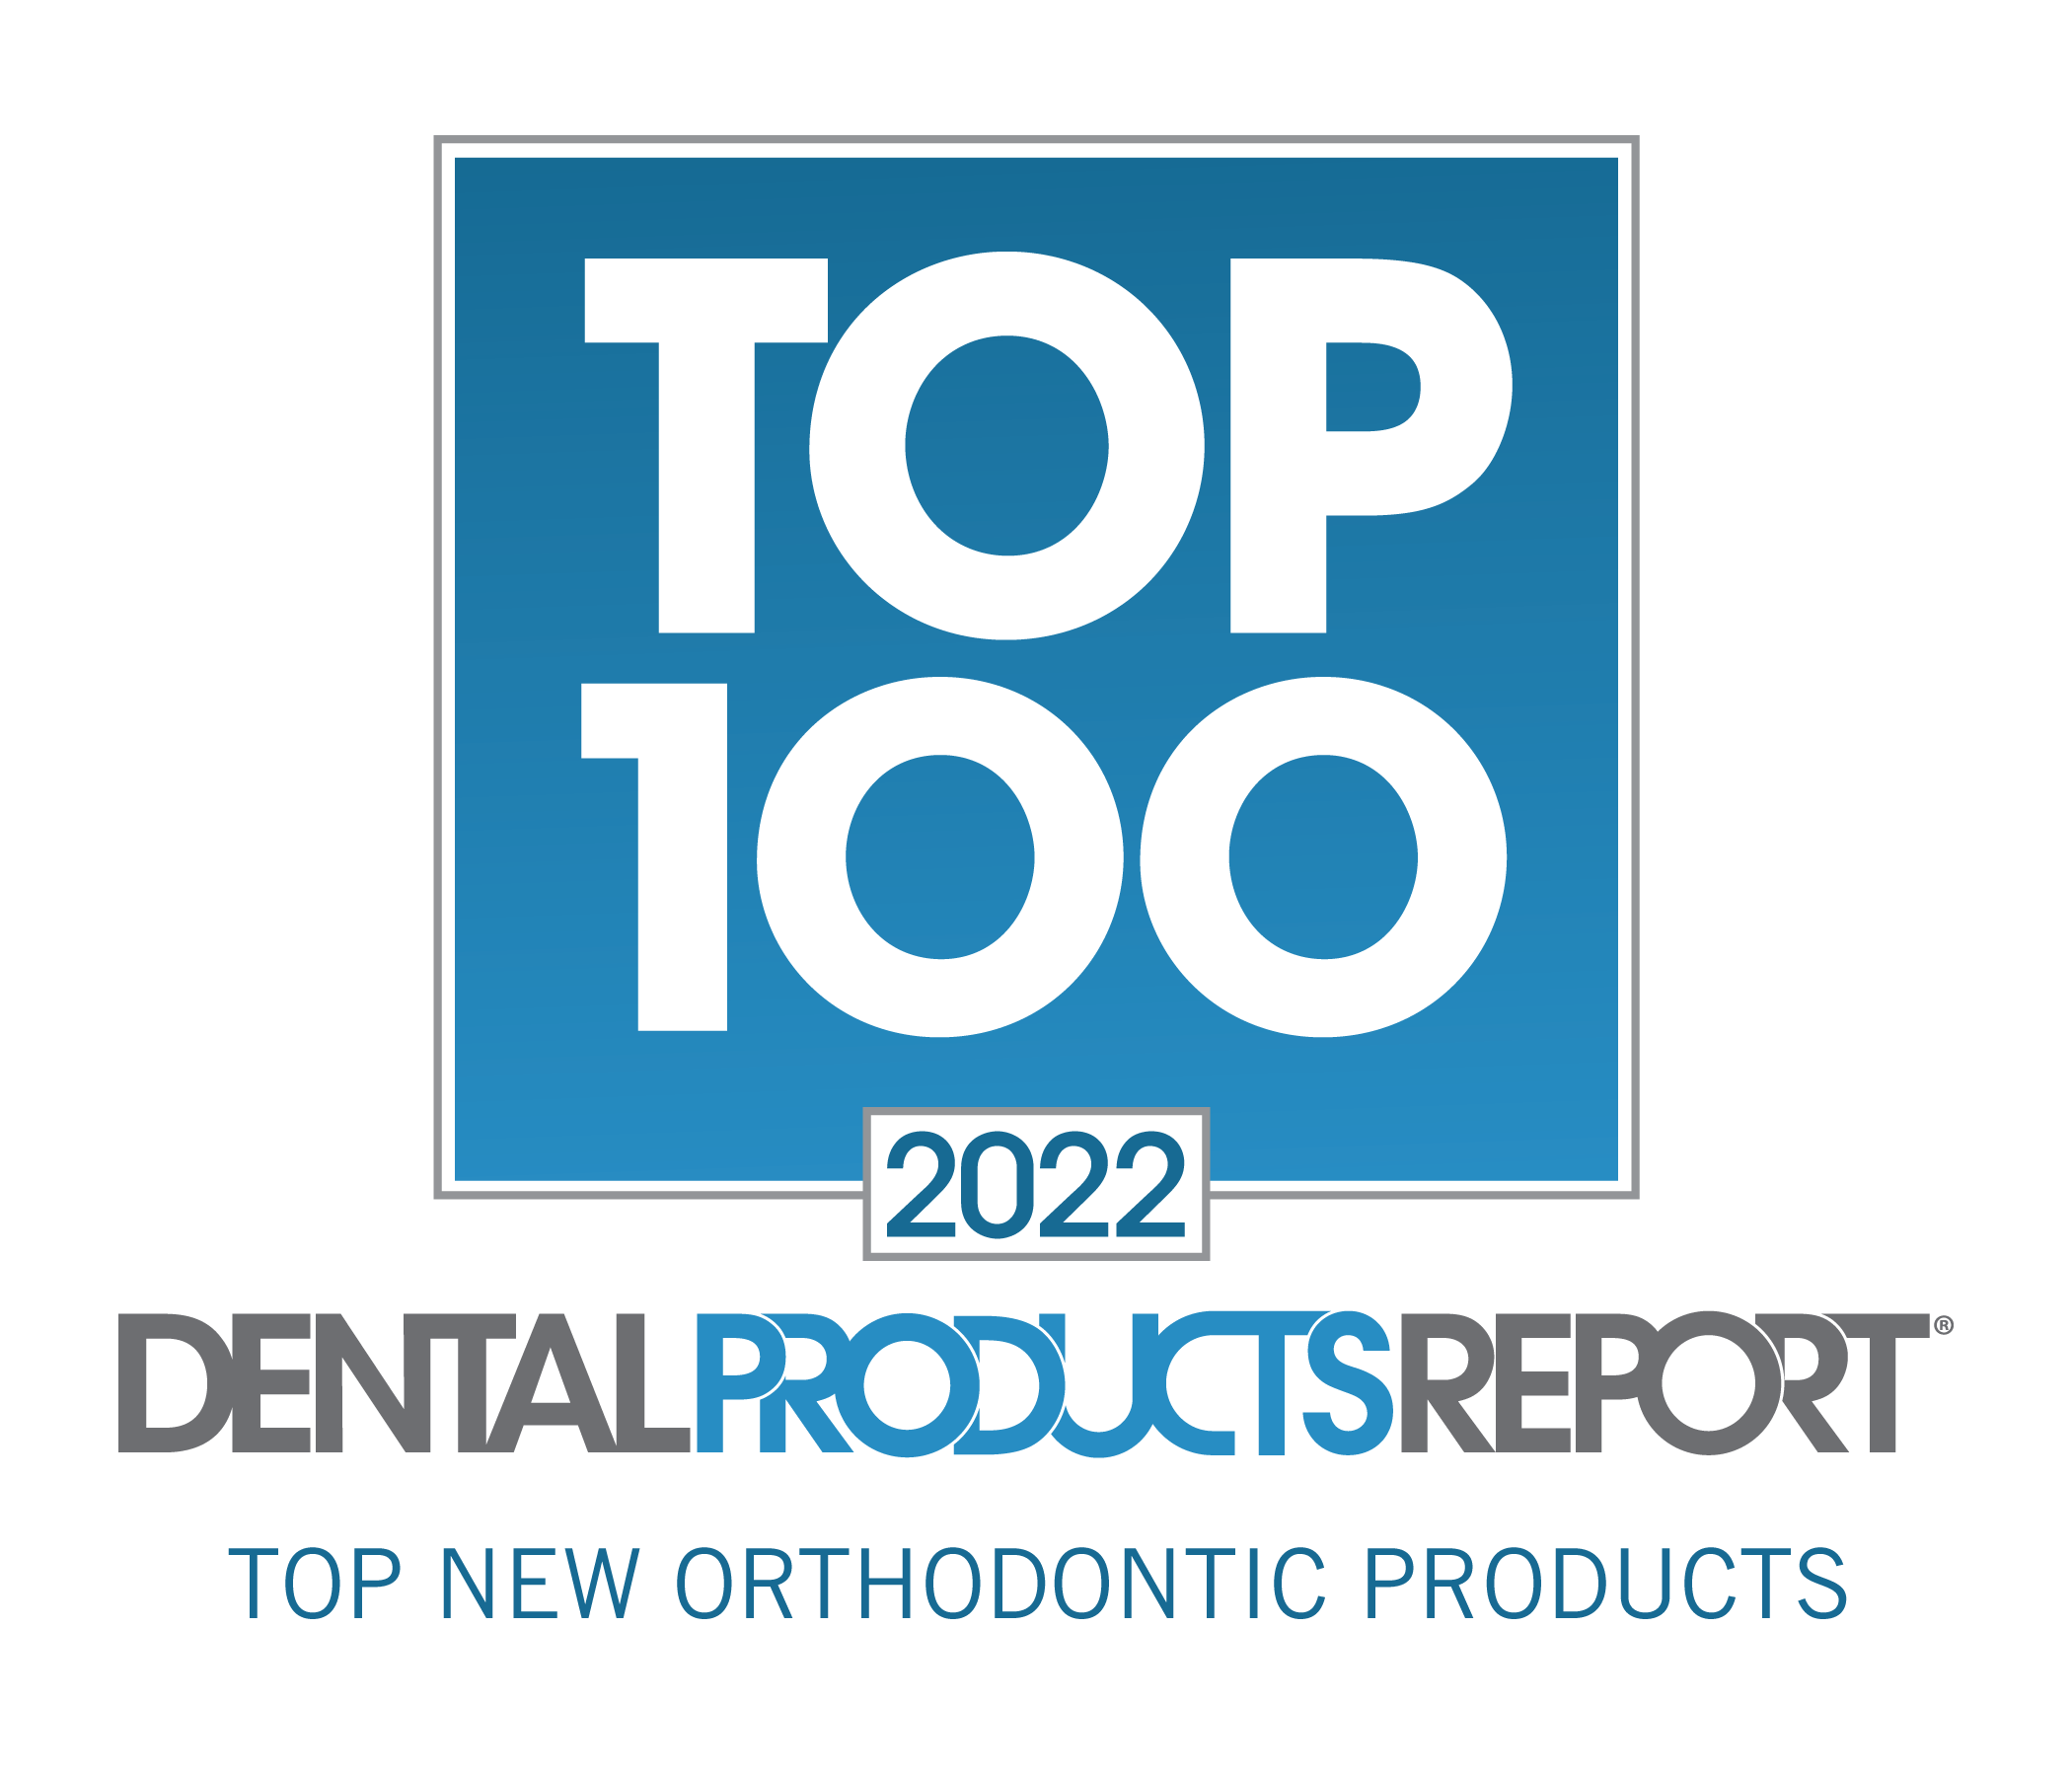 Top 5 Orthodontic Products of 2022